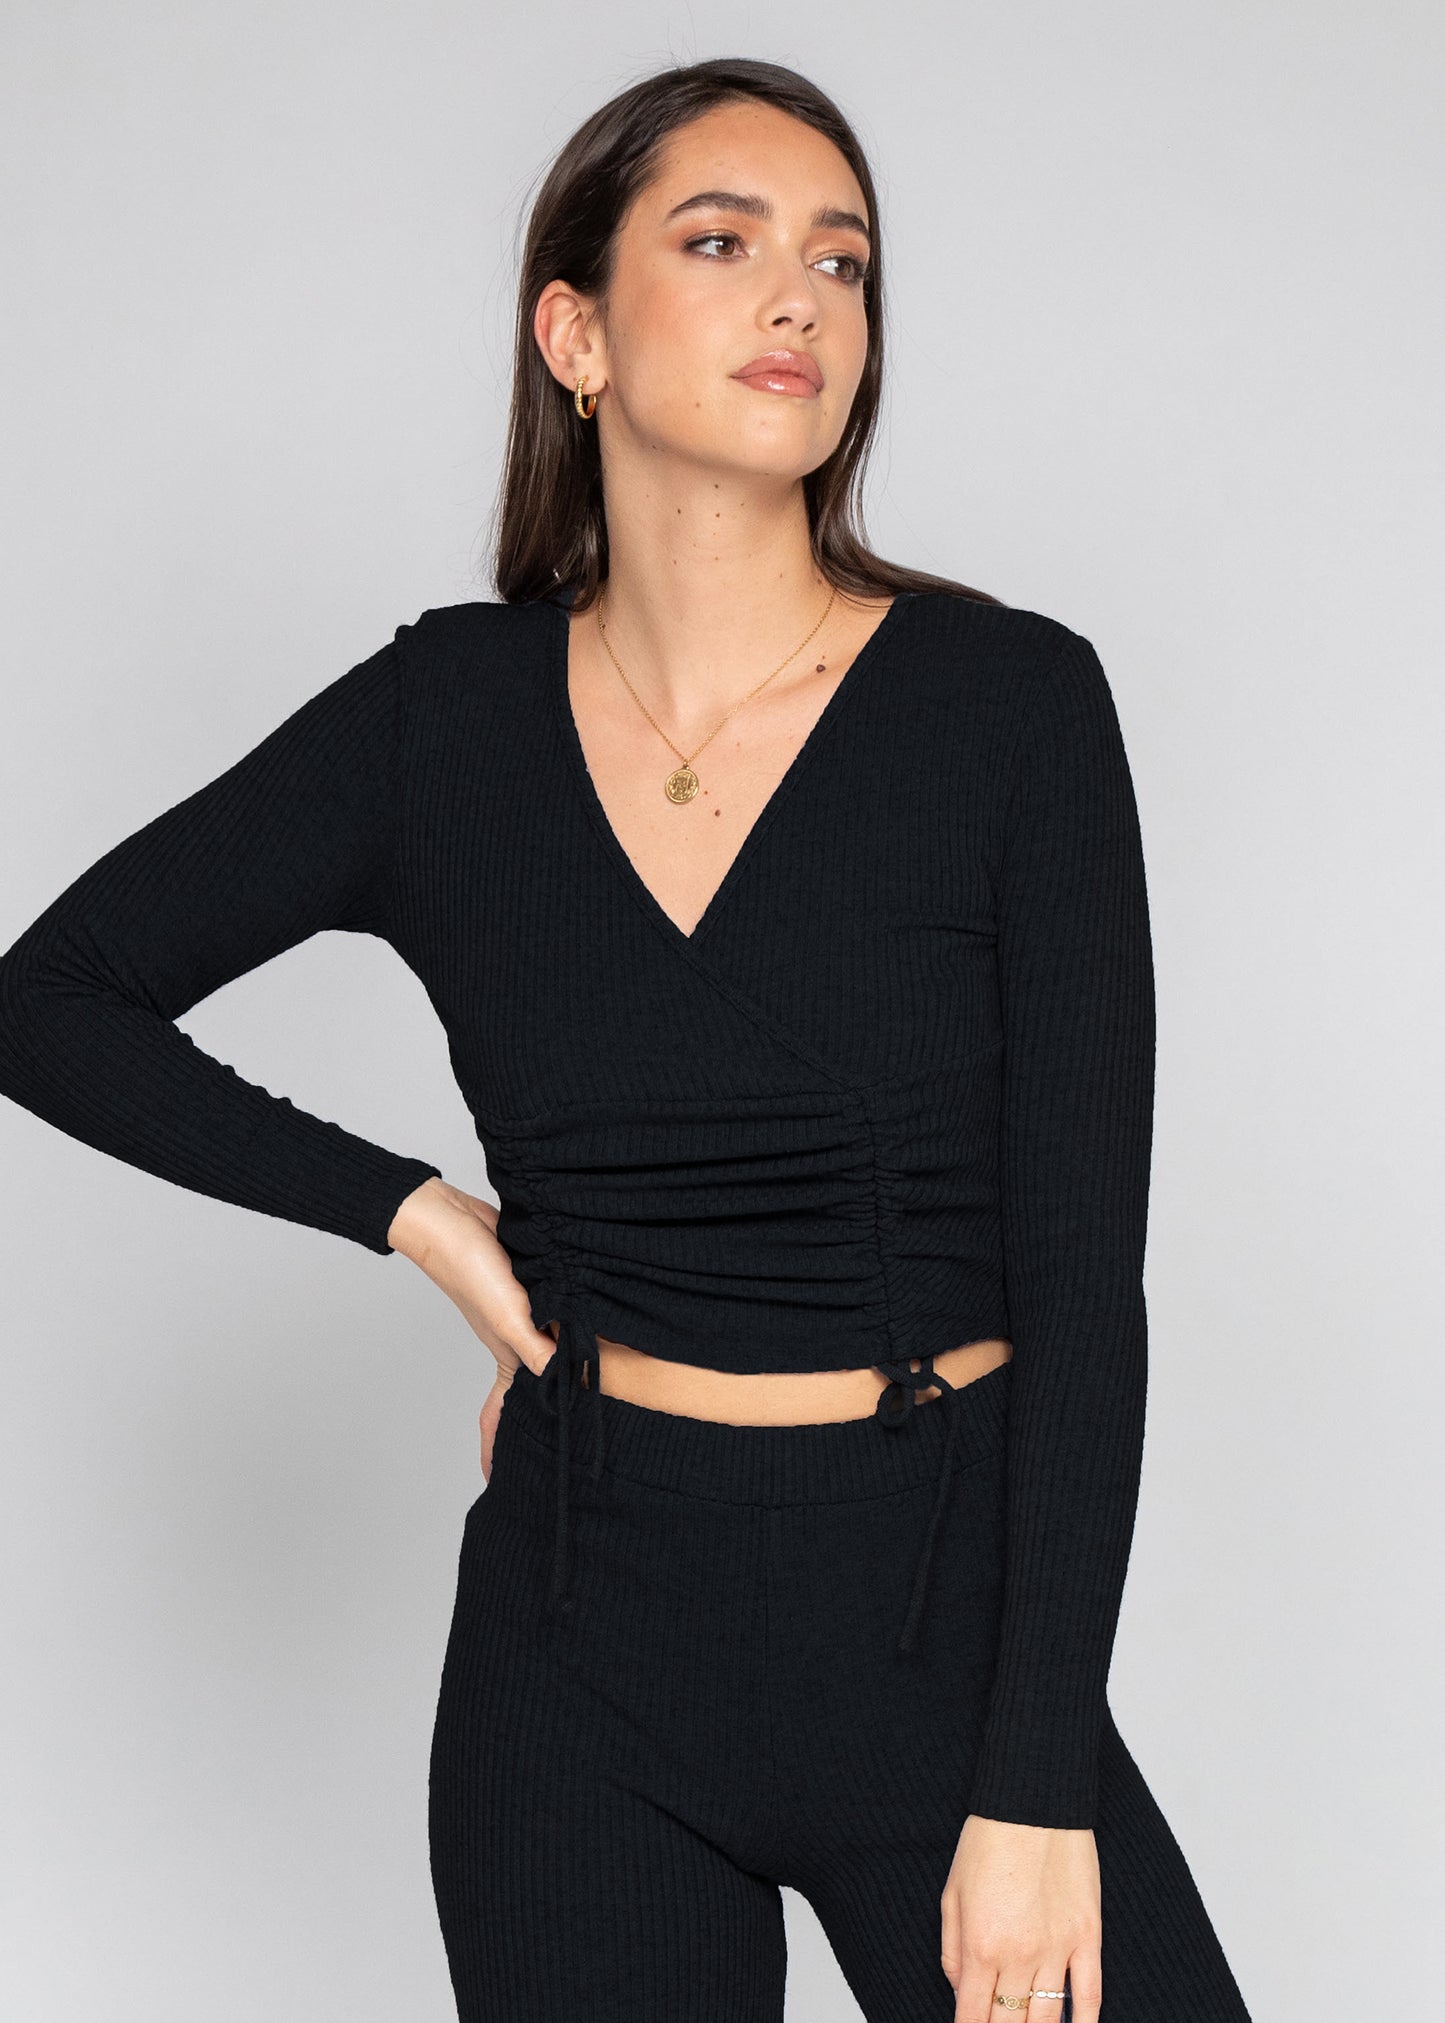 Wrap top with ruched front in black